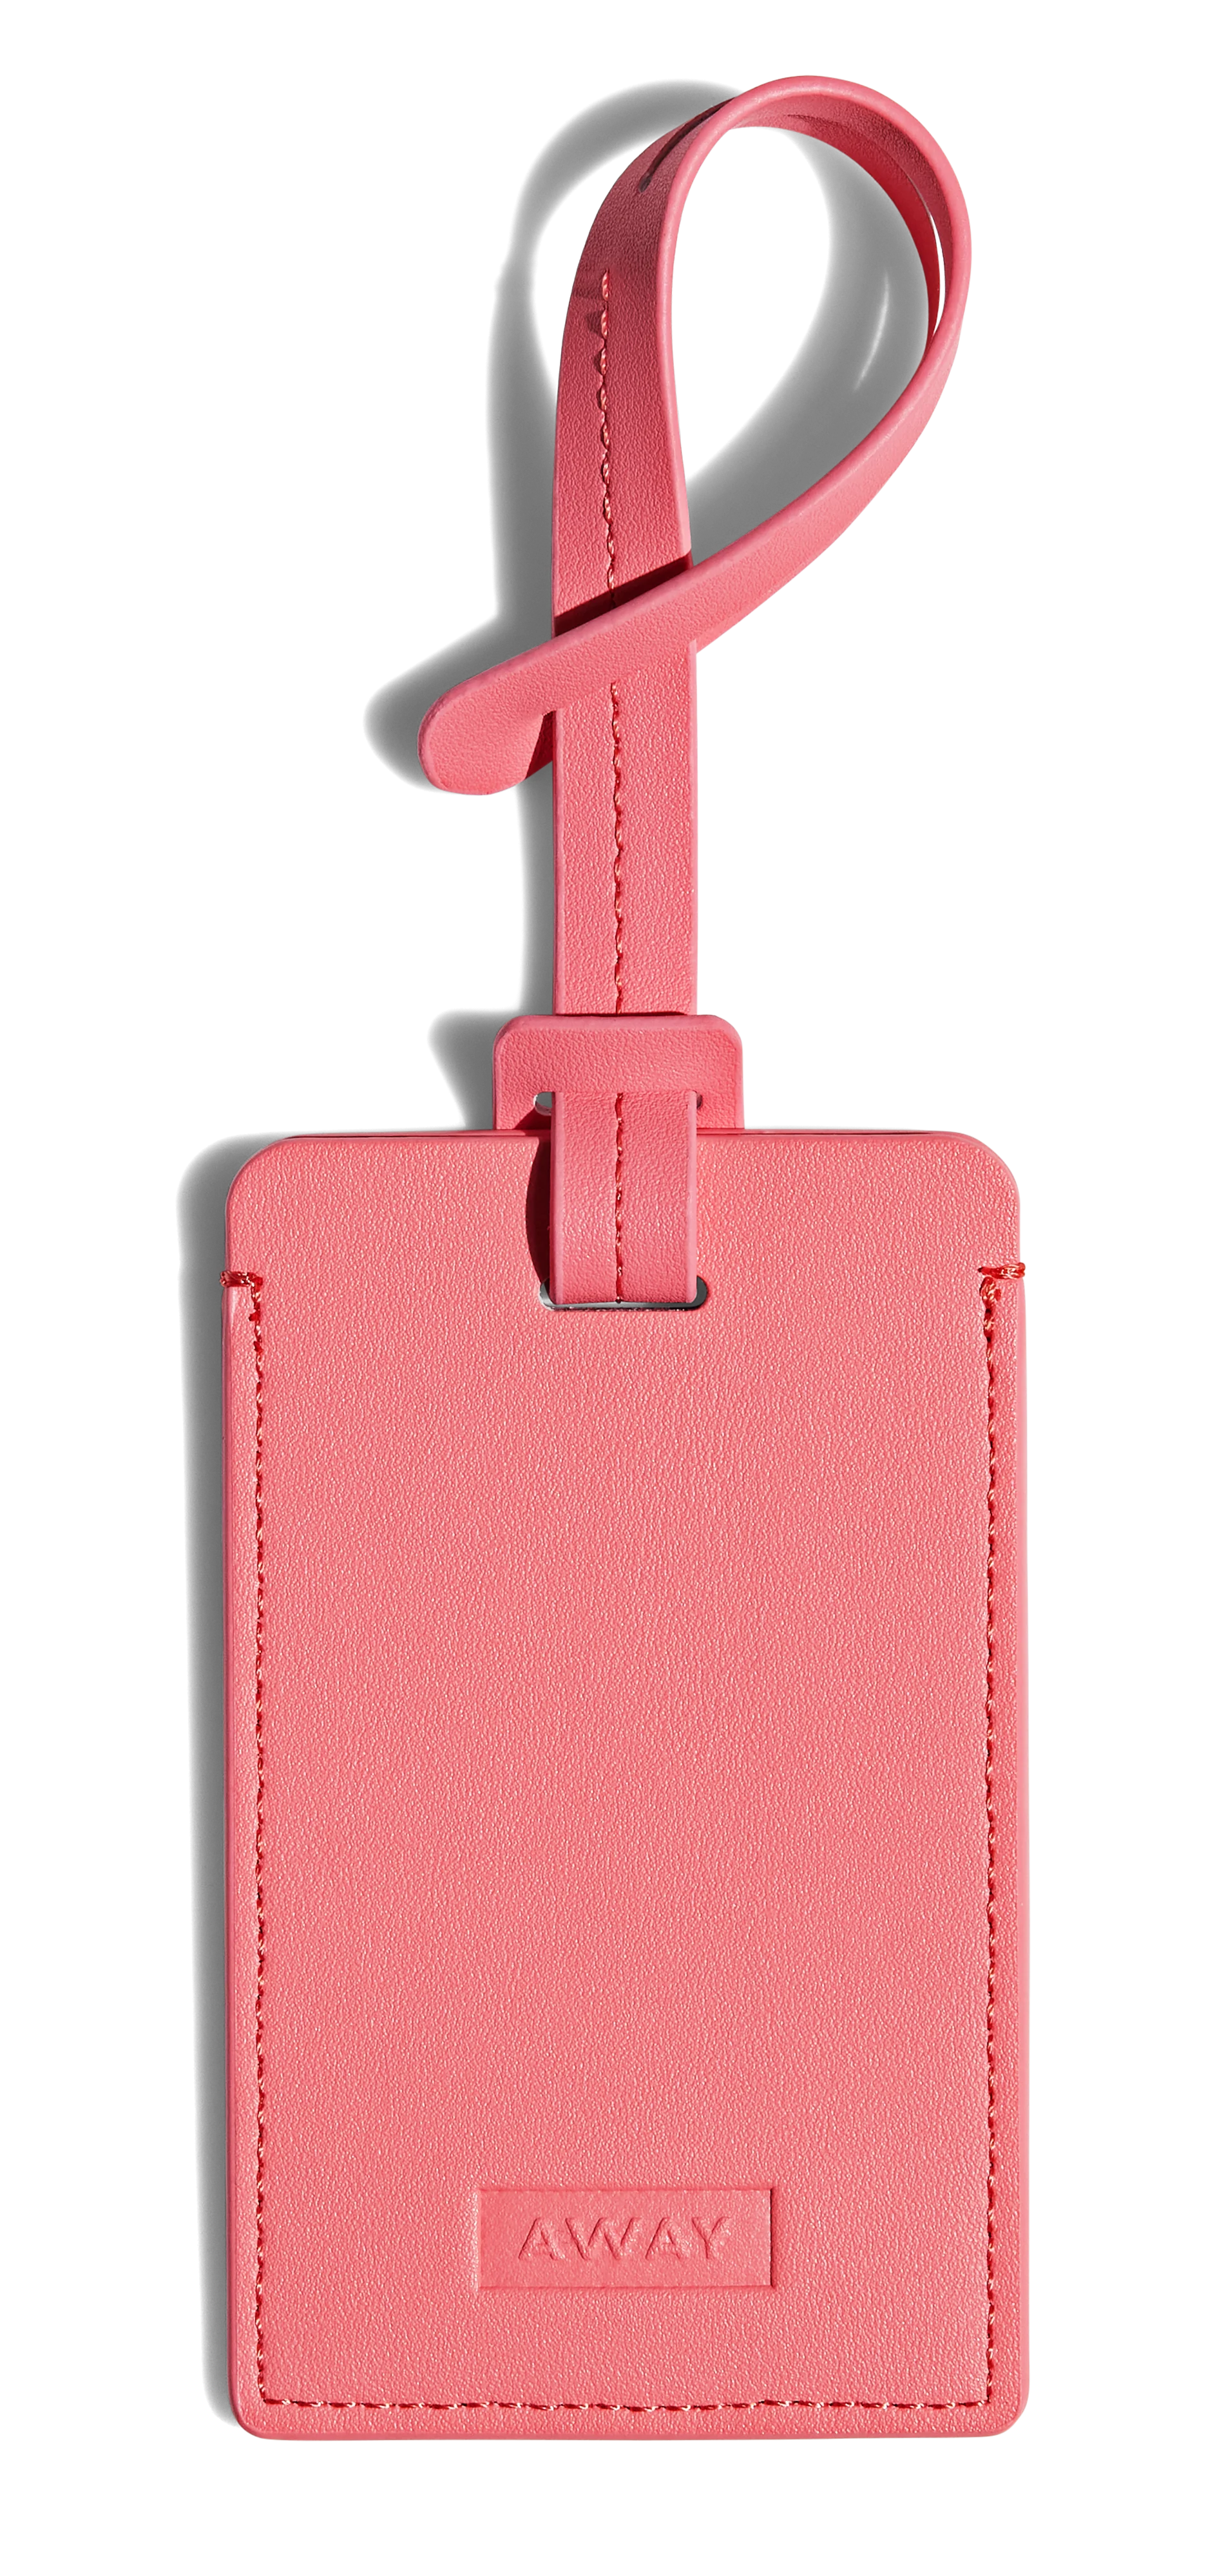 The Luggage Tag & Charm Duo in Pink Heart